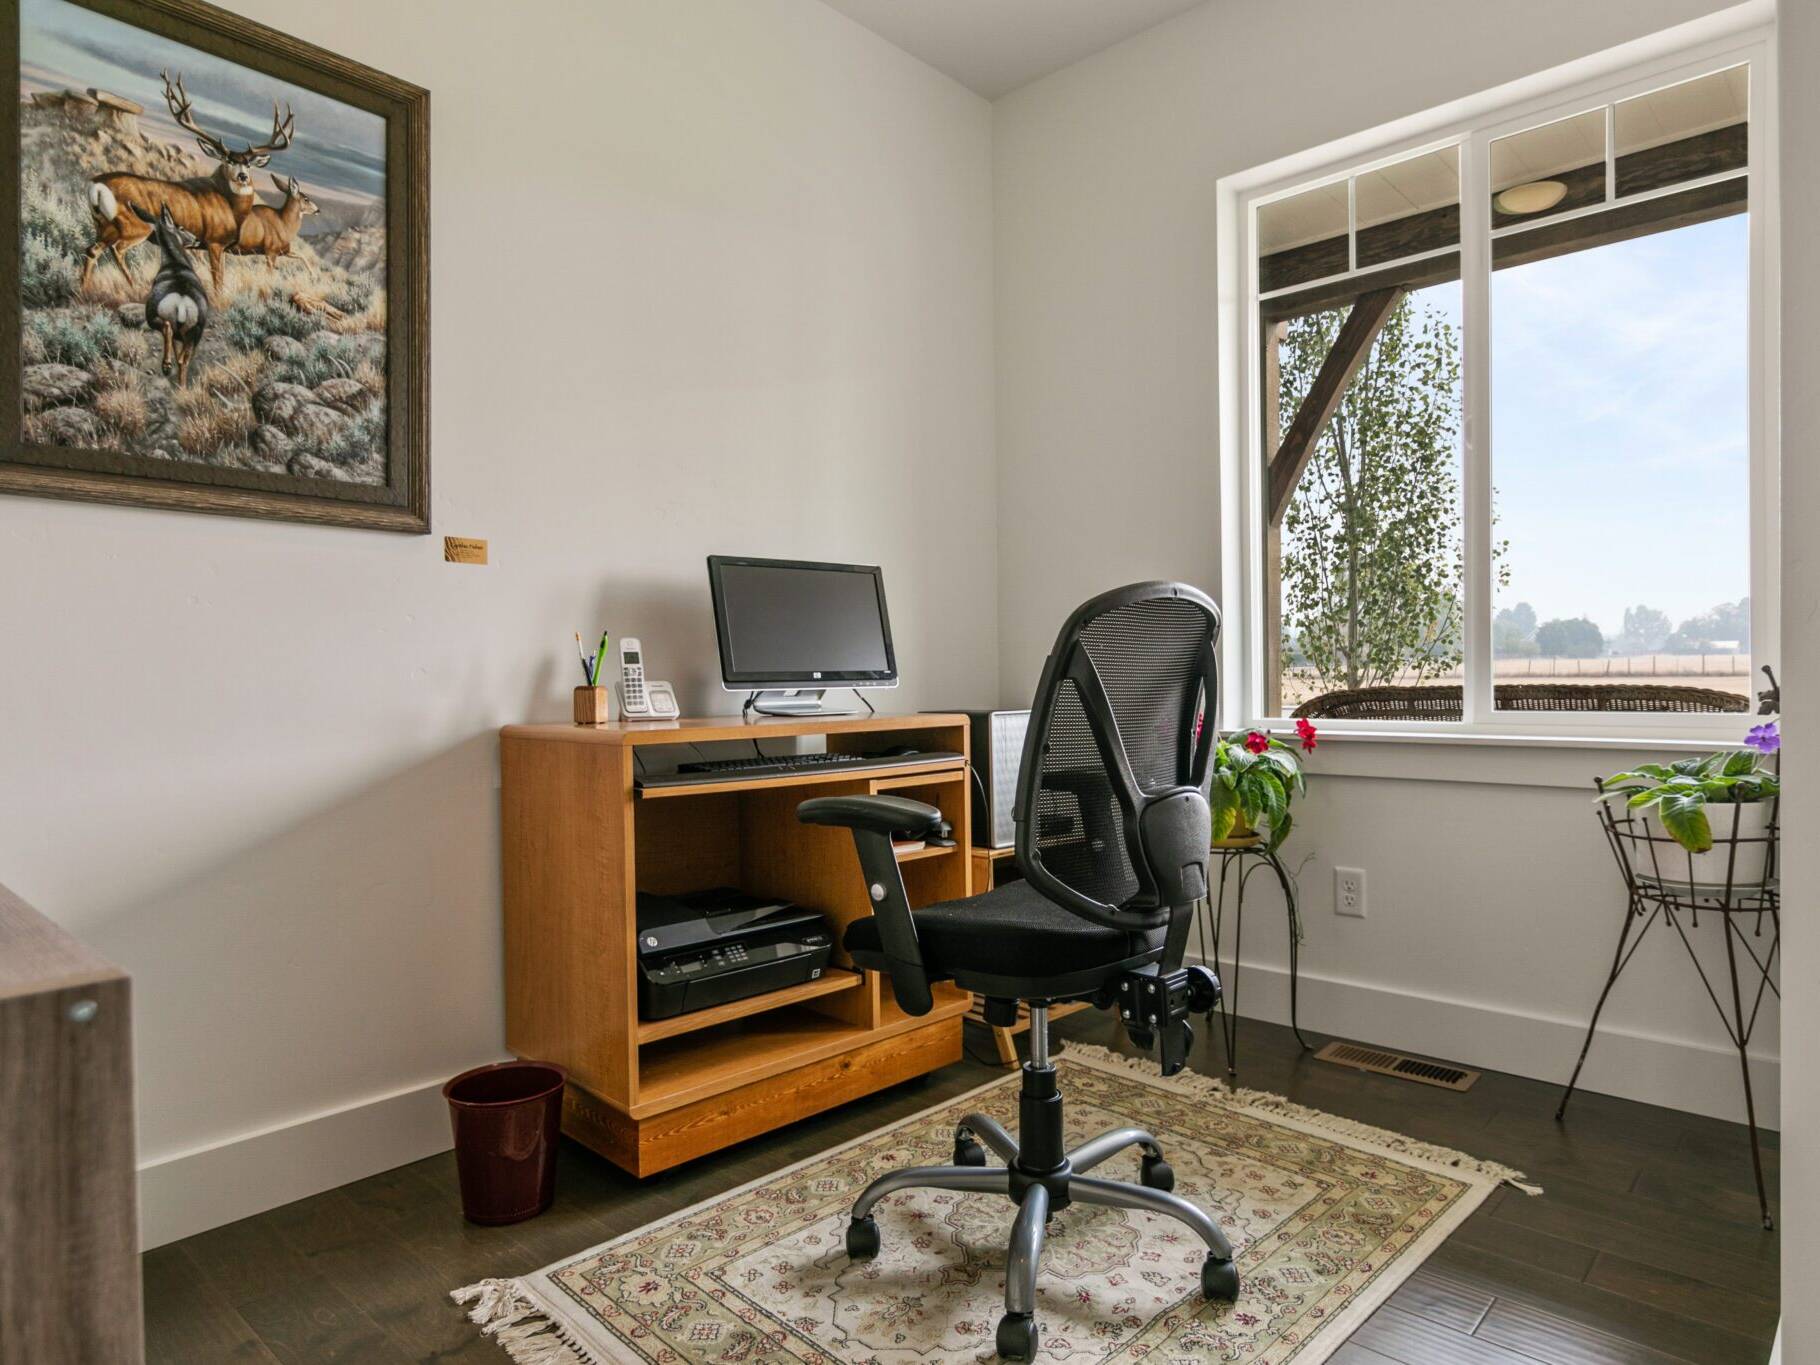 Office in The Seeley model home - Built by Big Sky Builder in Hamilton, MT